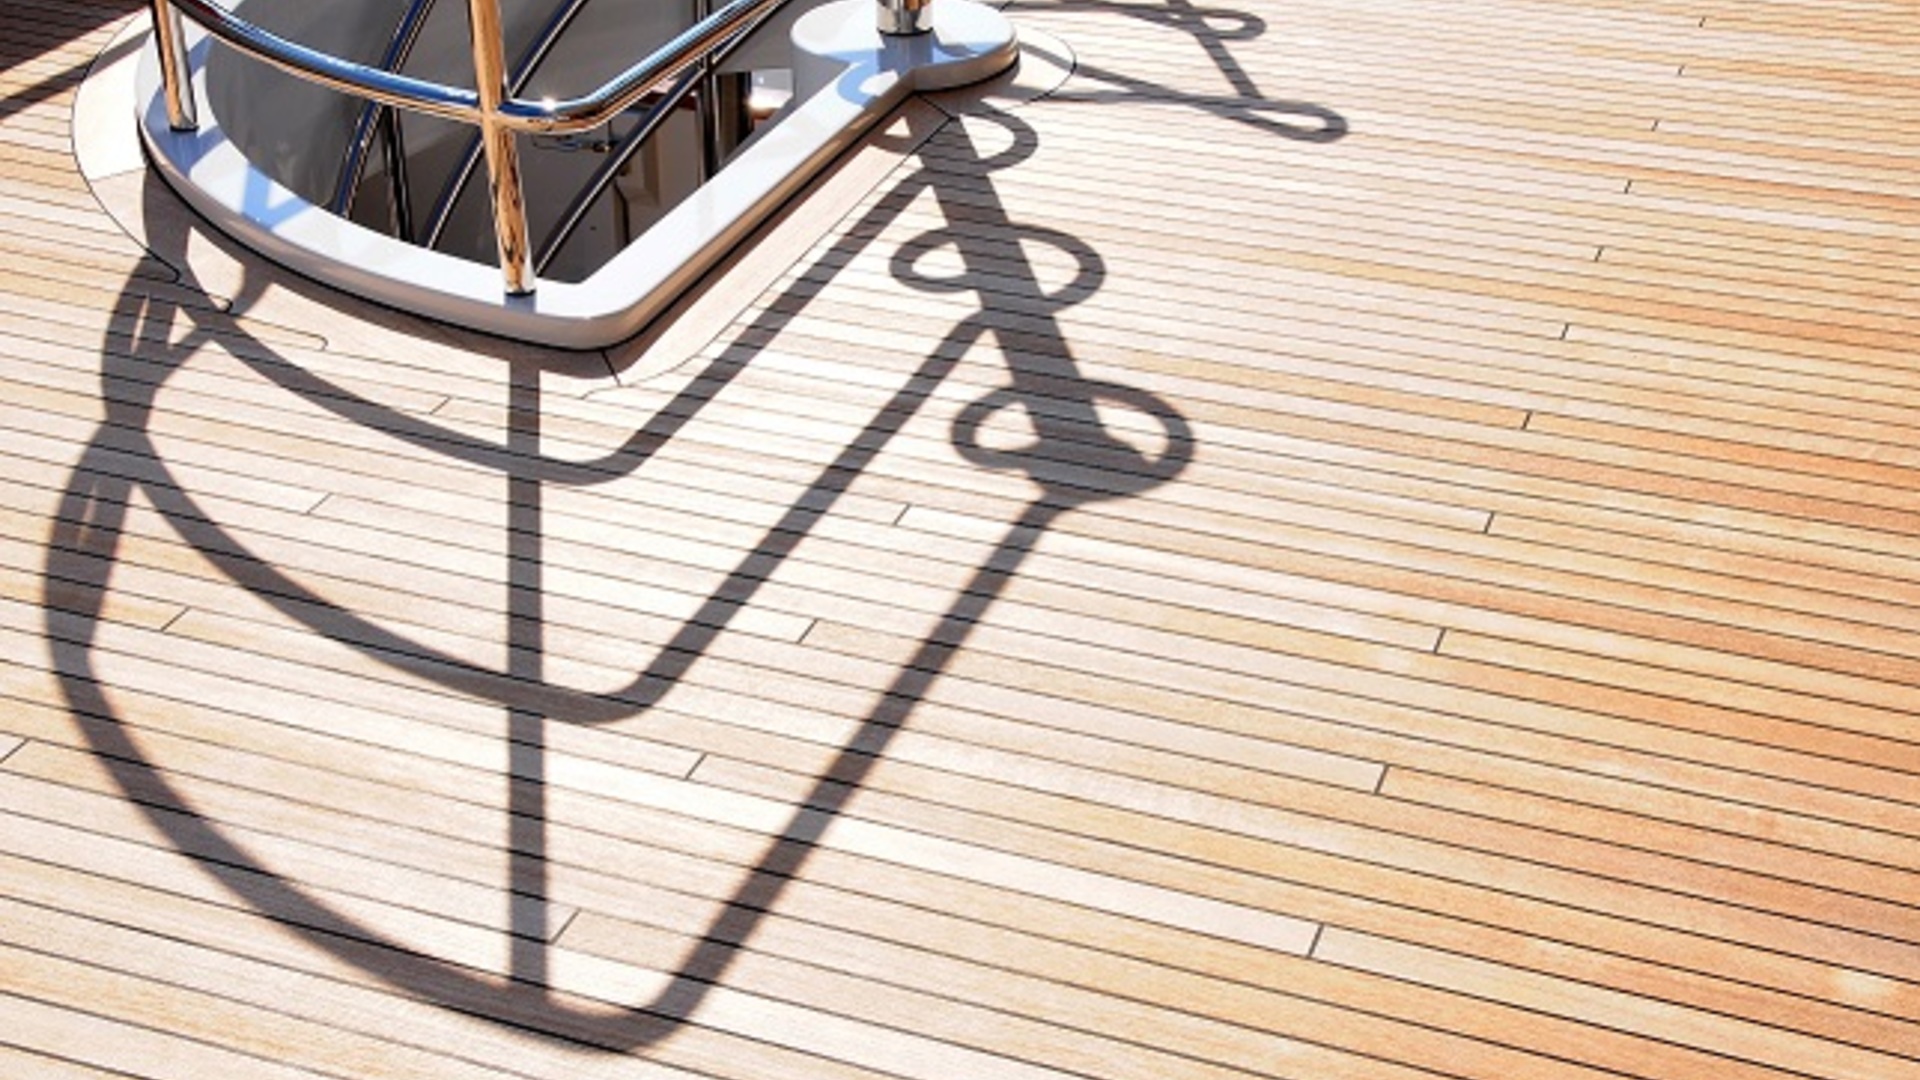 Ensuring more sustainable timber in the yachting industry